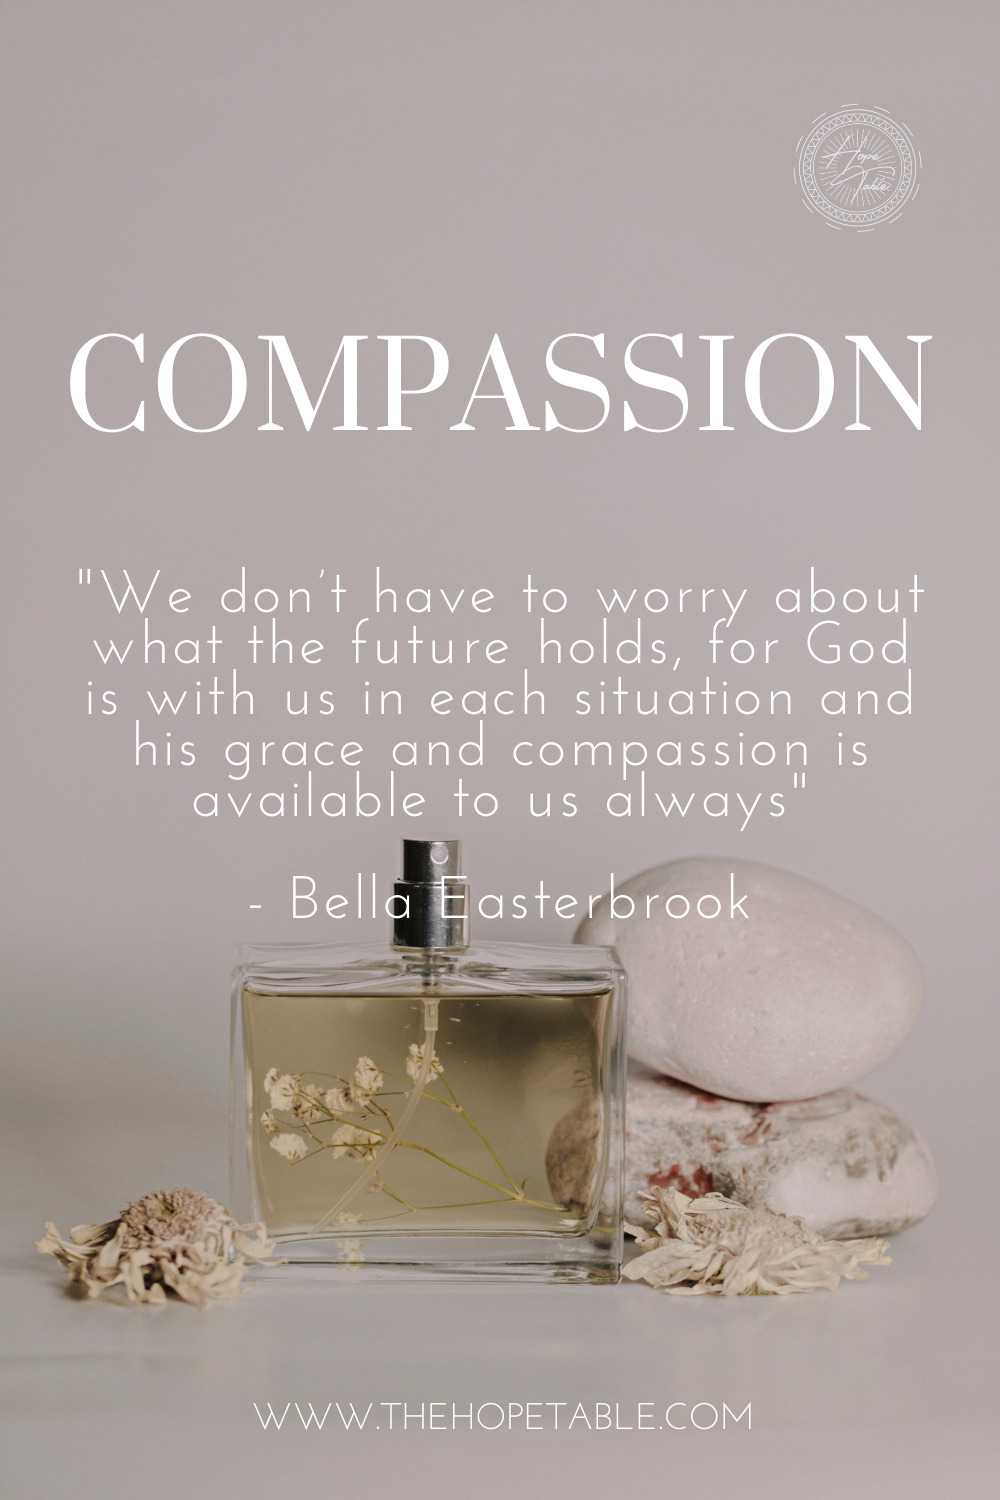 Quote on compassion and grace pinterest pin